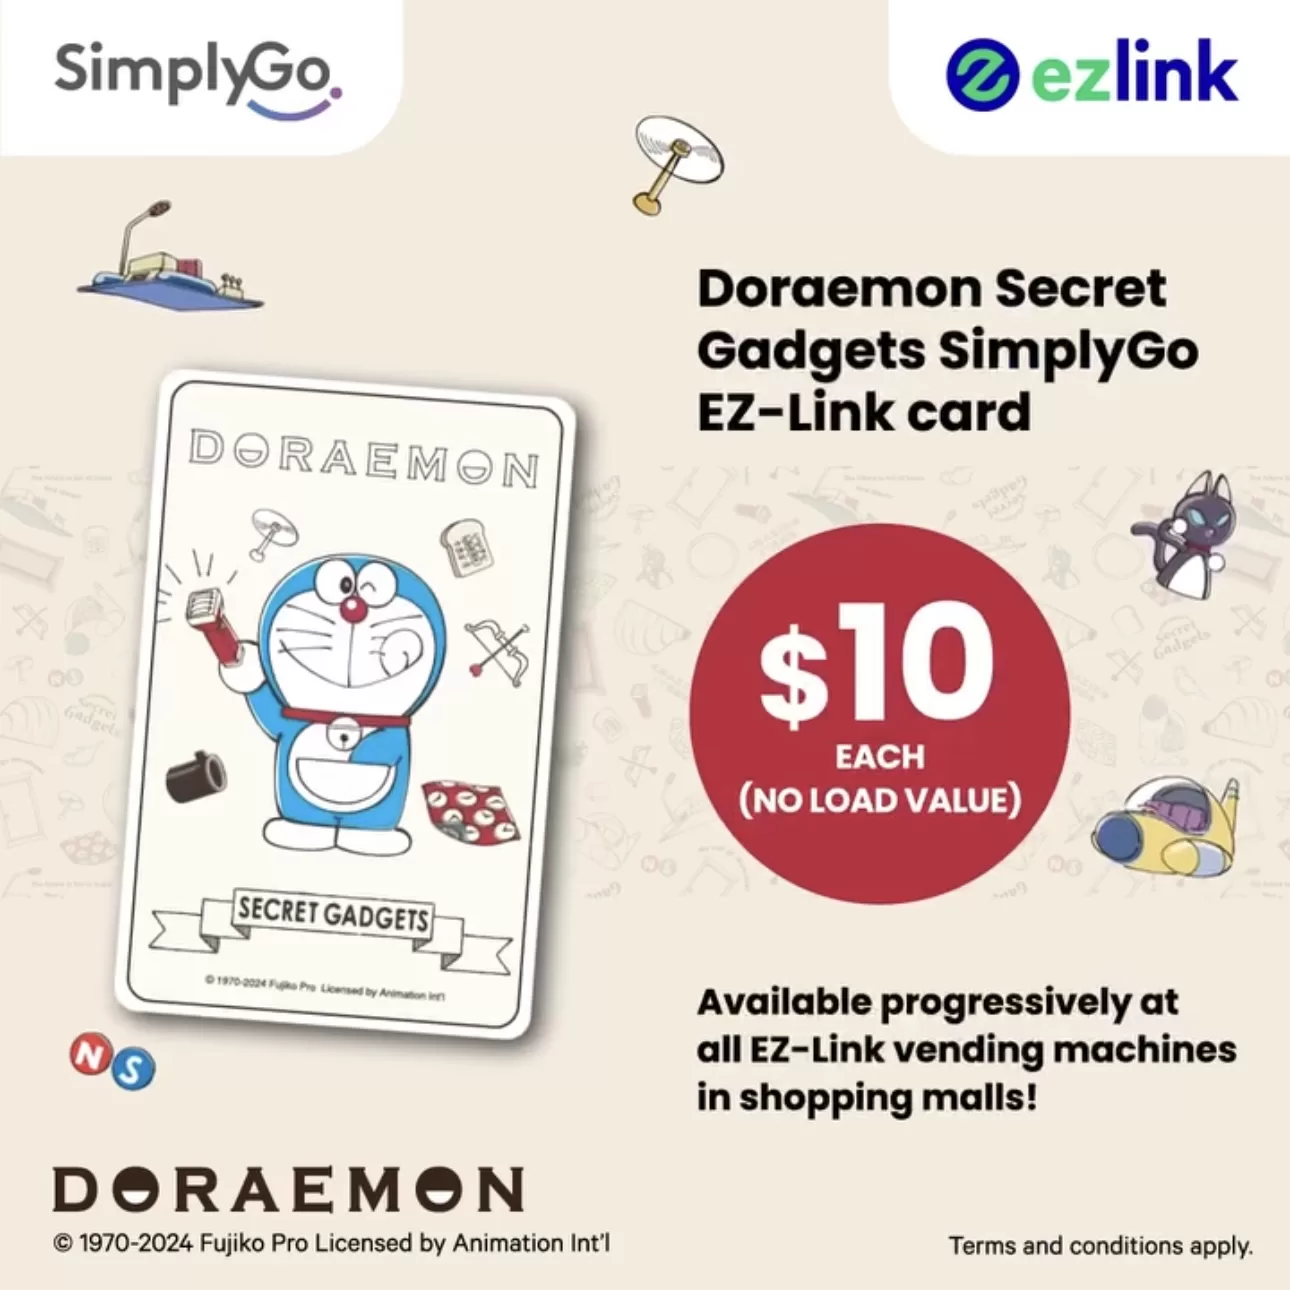 You are currently viewing Introducing the Doraemon Secret Gadgets SimplyGo EZ-Link Card by EZ-Link